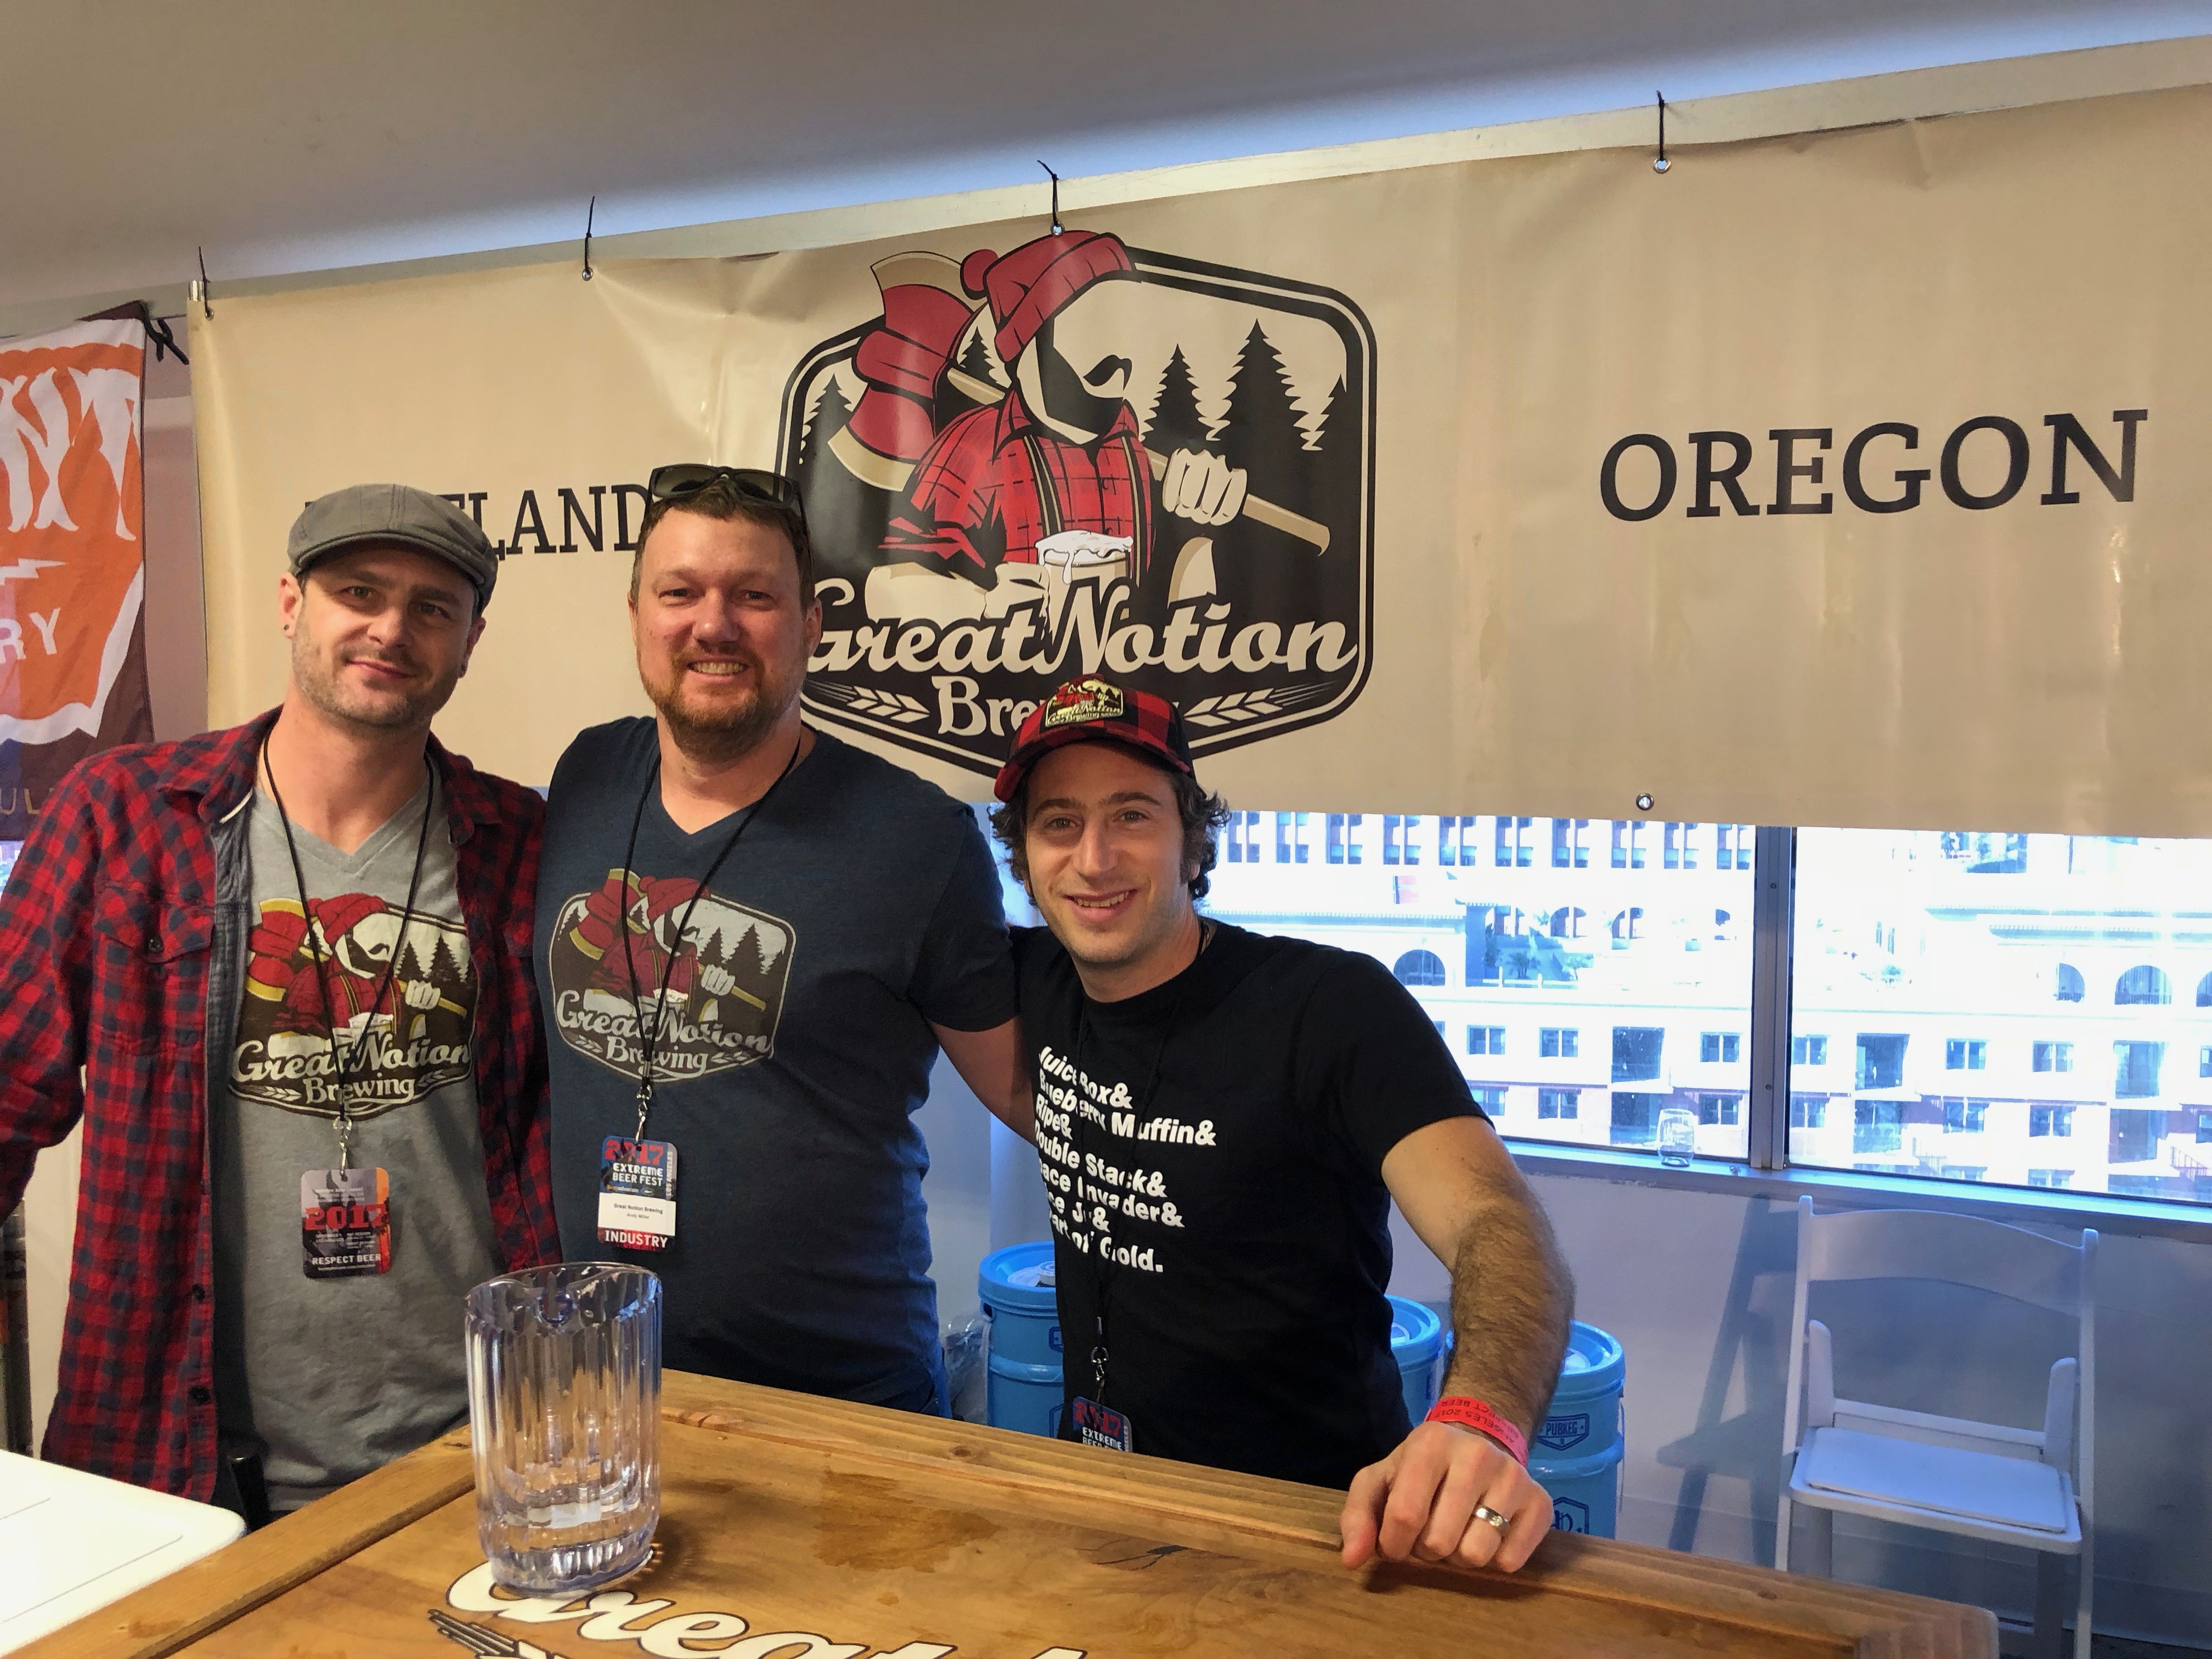 Great Notion was a very popular brewery at BeerAdvocate Extreme Beer Fest in Los Angeles.